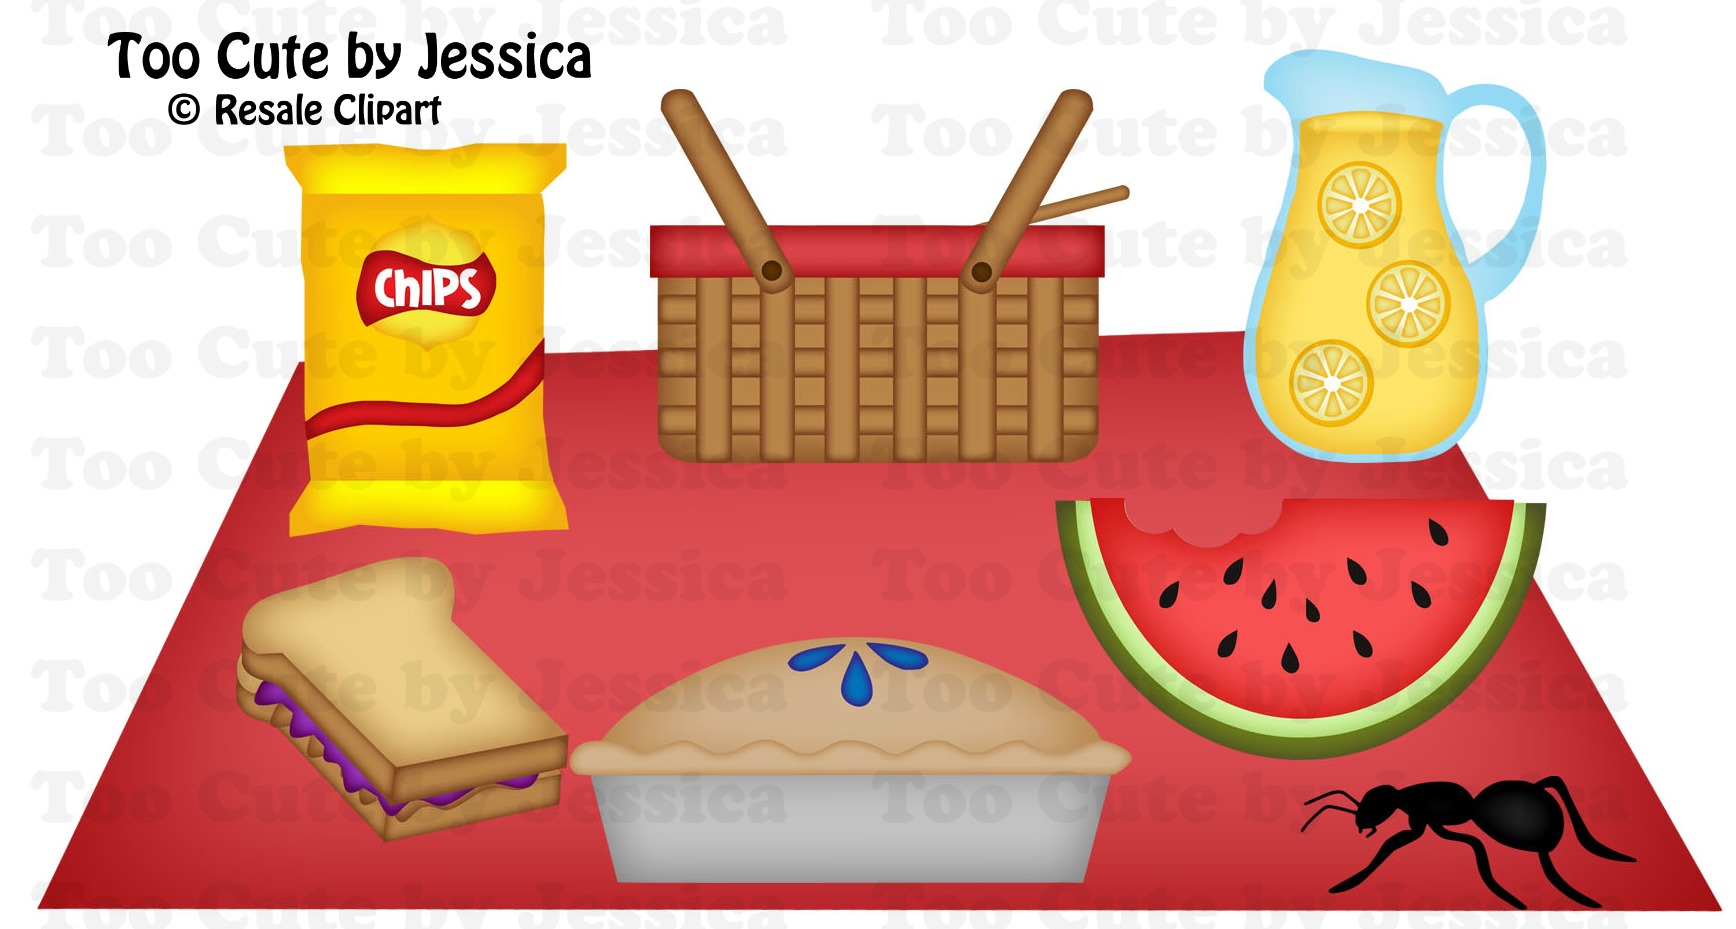 Picnic Blanket Clipart All Used For Free Clipart